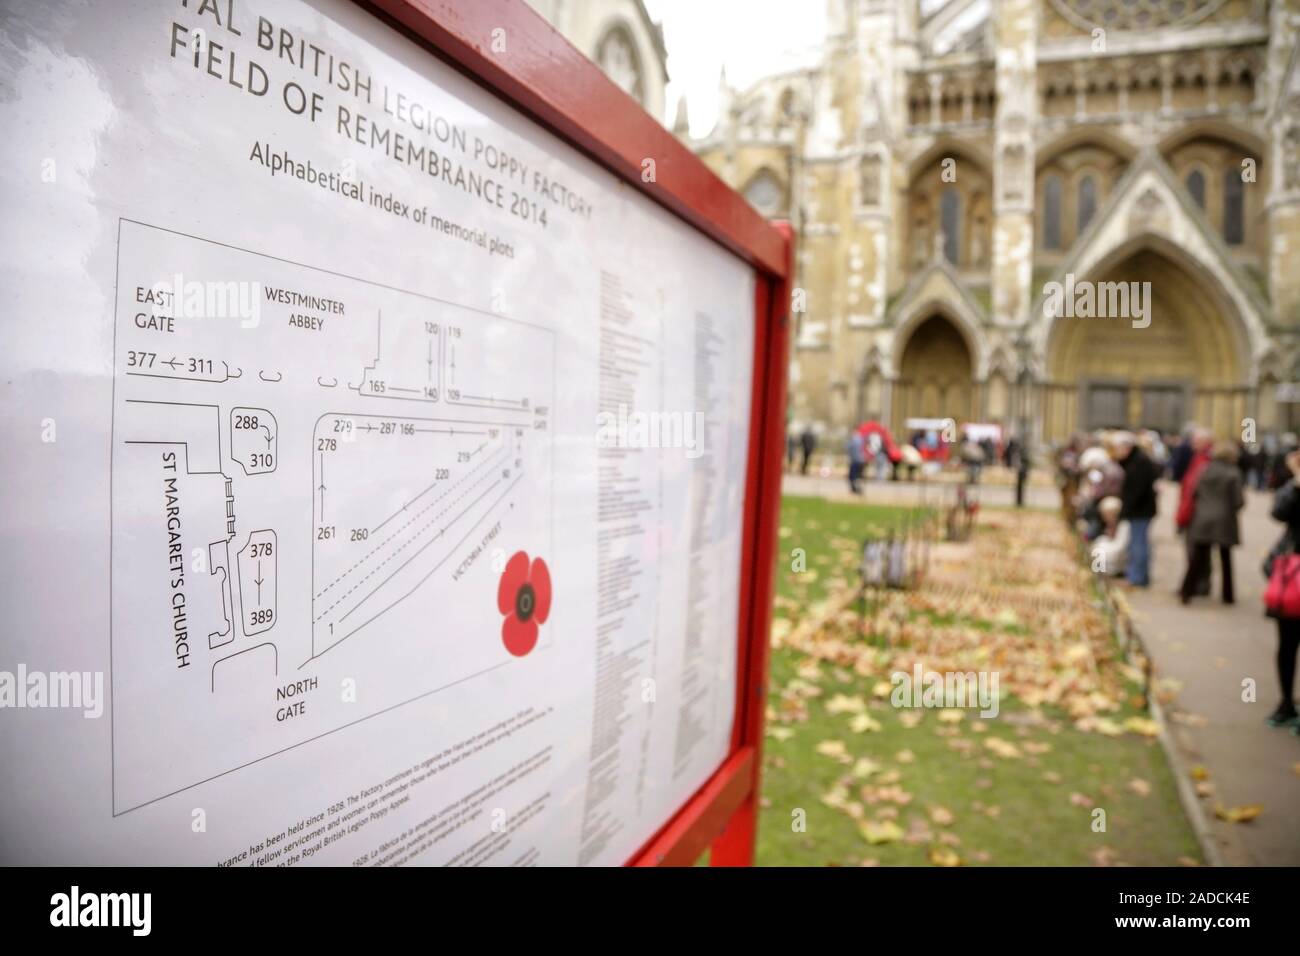 Poppies at the Royal British Legion Field of Remembrance, Westminster Abbey, London, UK. Stock Photo